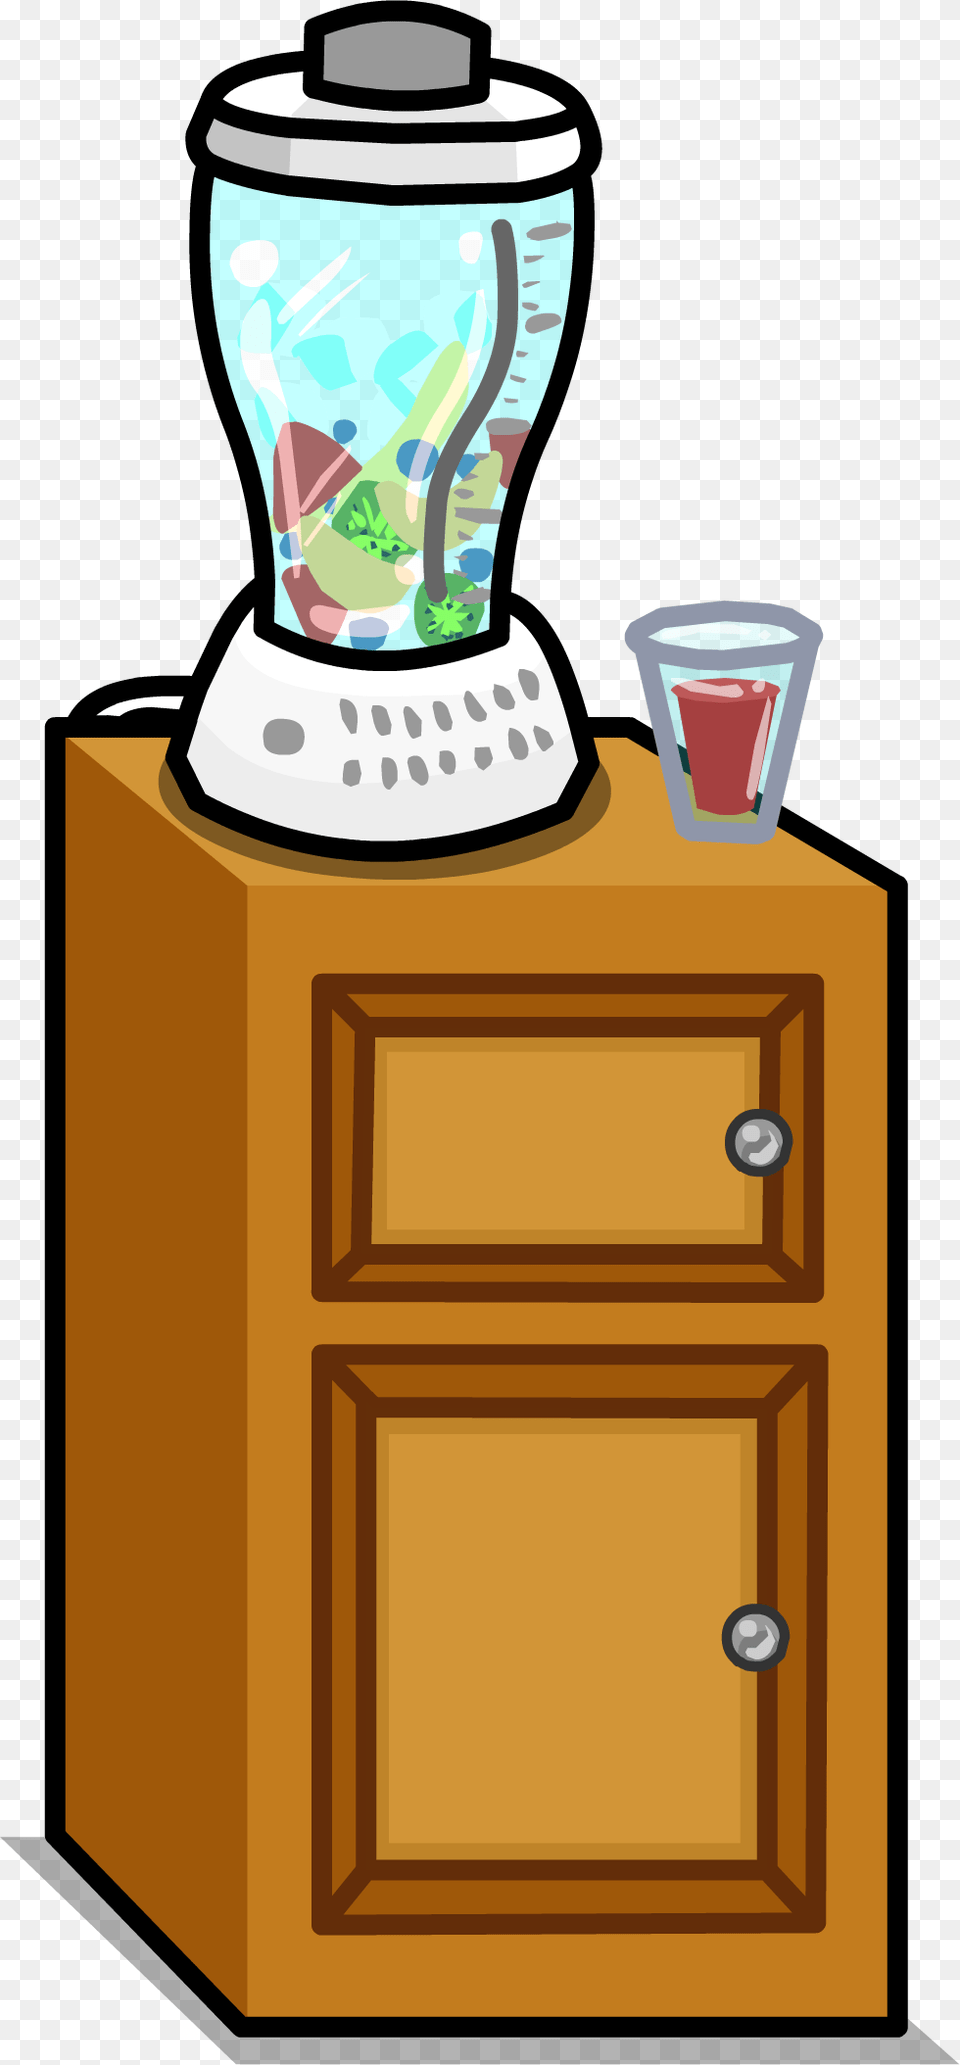 Furniture Icon Club Penguin Furniture Igloo Id Vitamin, Appliance, Device, Electrical Device, Mixer Free Transparent Png